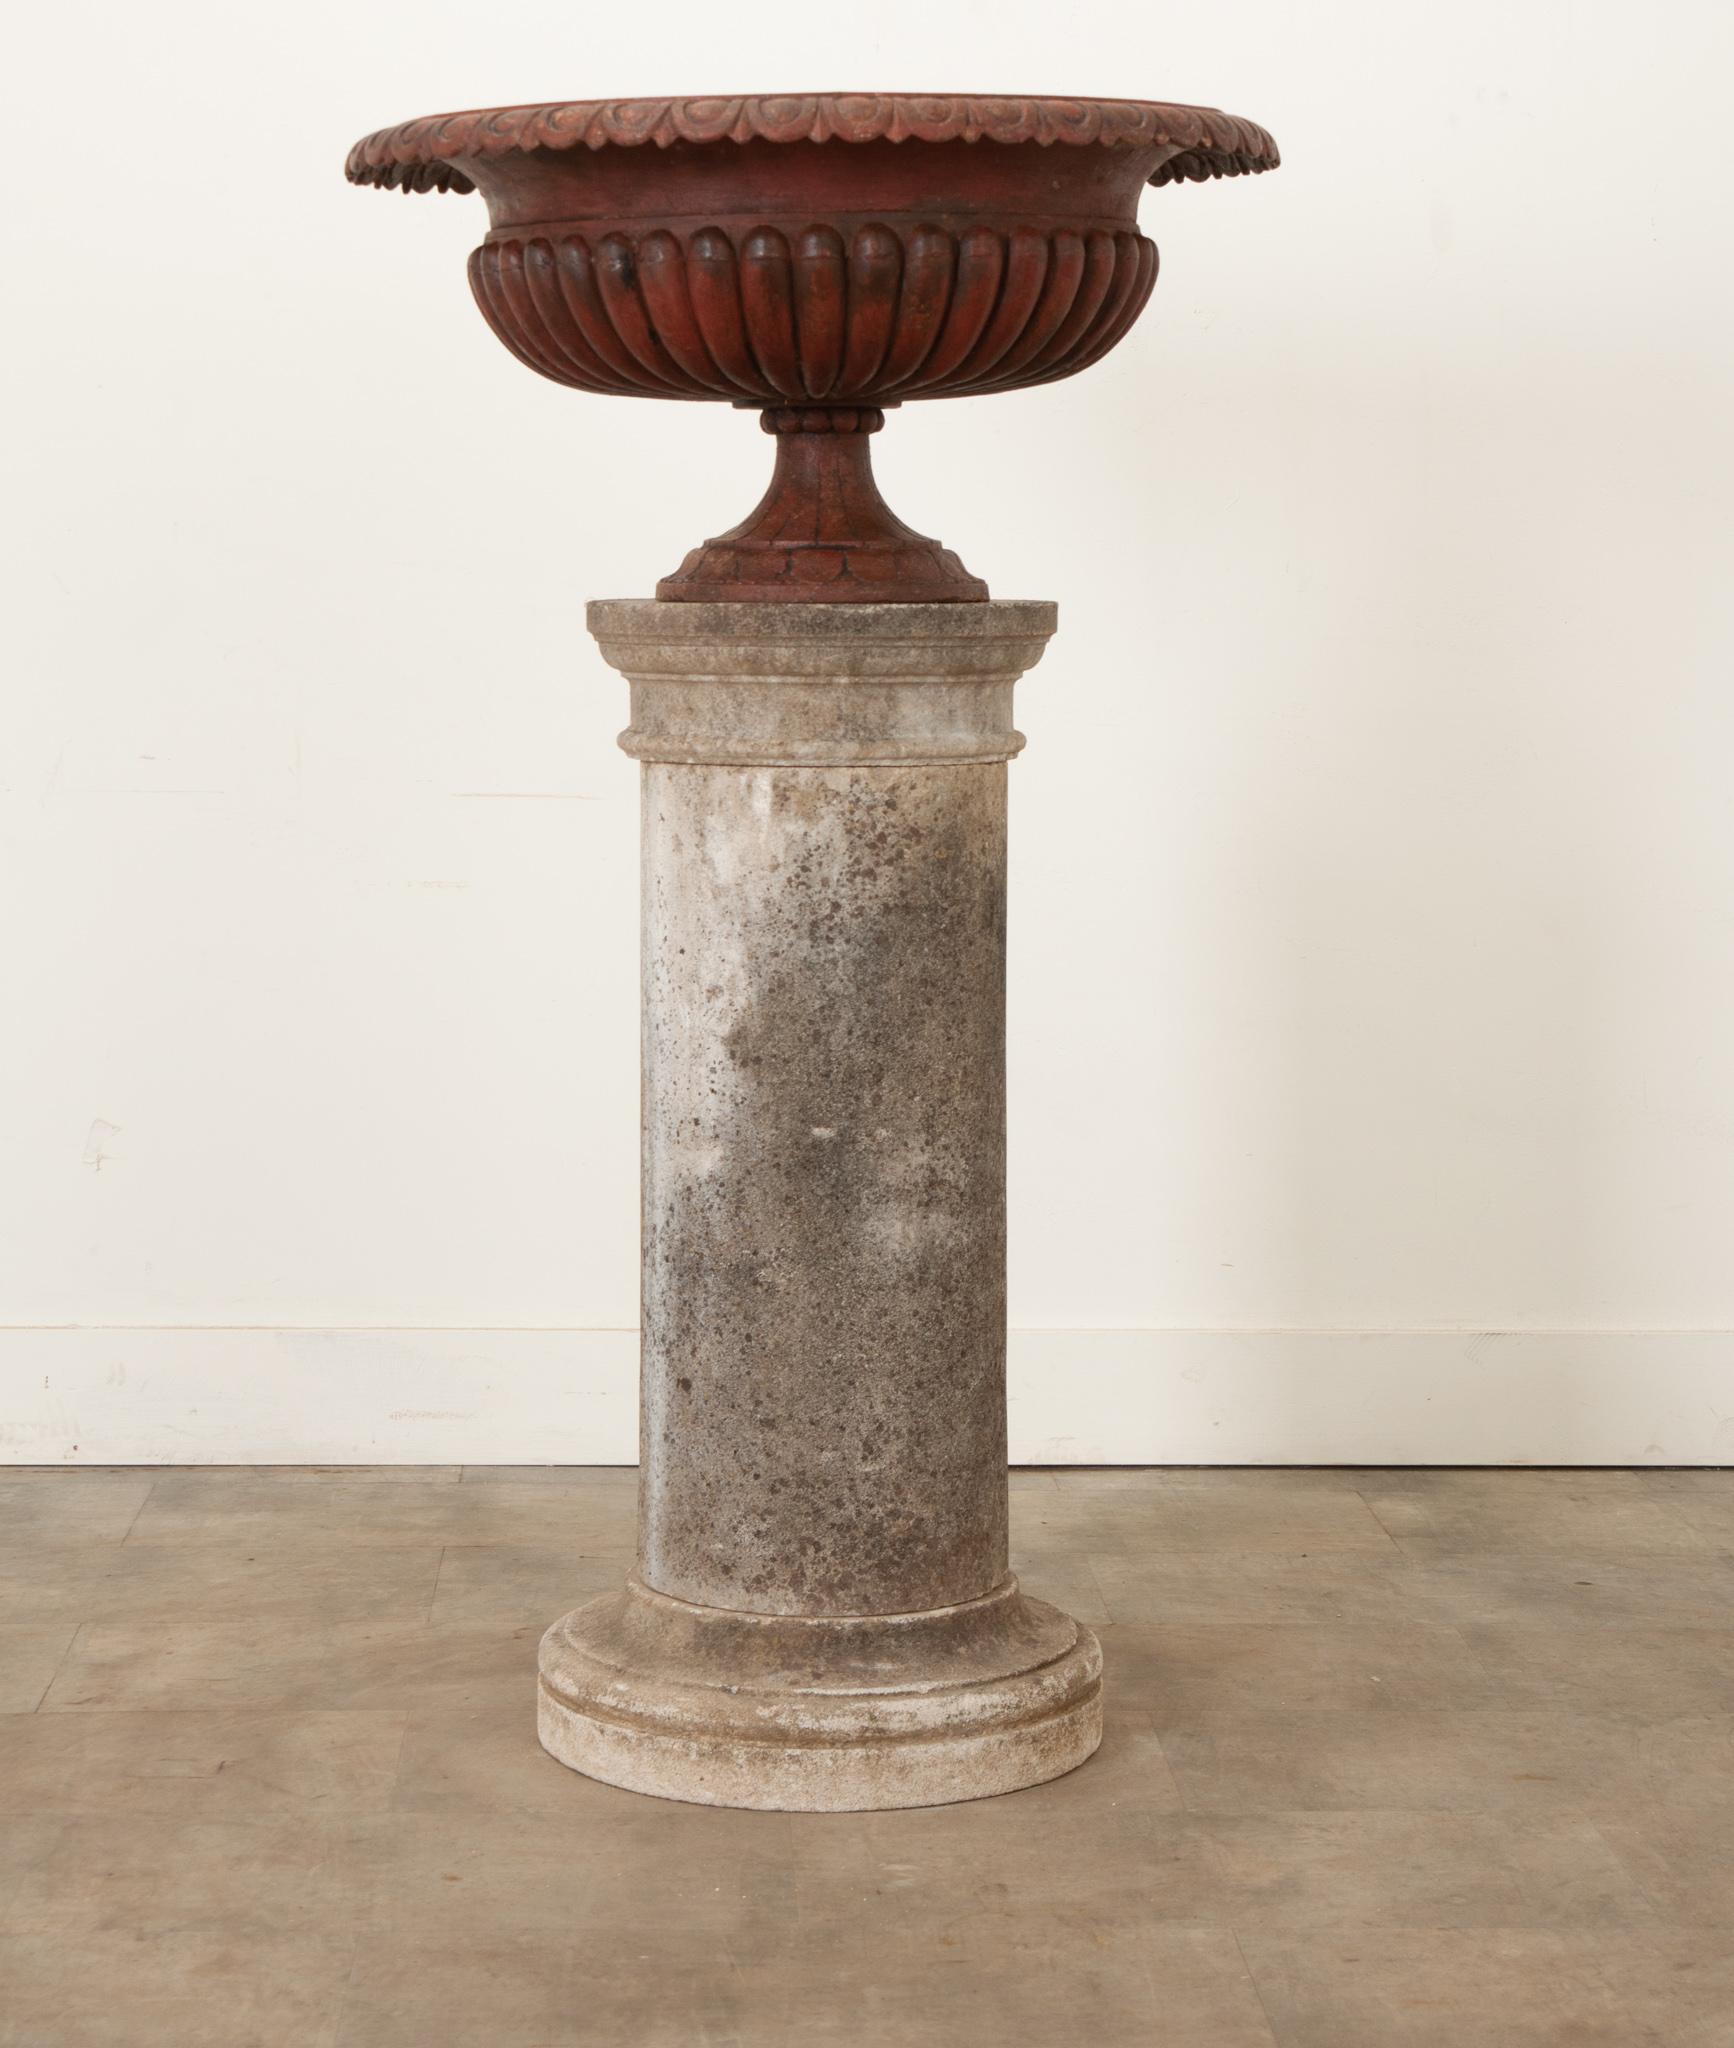 This antique urn, painted deep red, is the perfect way to add classical style to your garden. Crafted from cast iron with egg and dart motifs on its circular fluted shank and band around the concave center- it has gained a fantastic patina over the